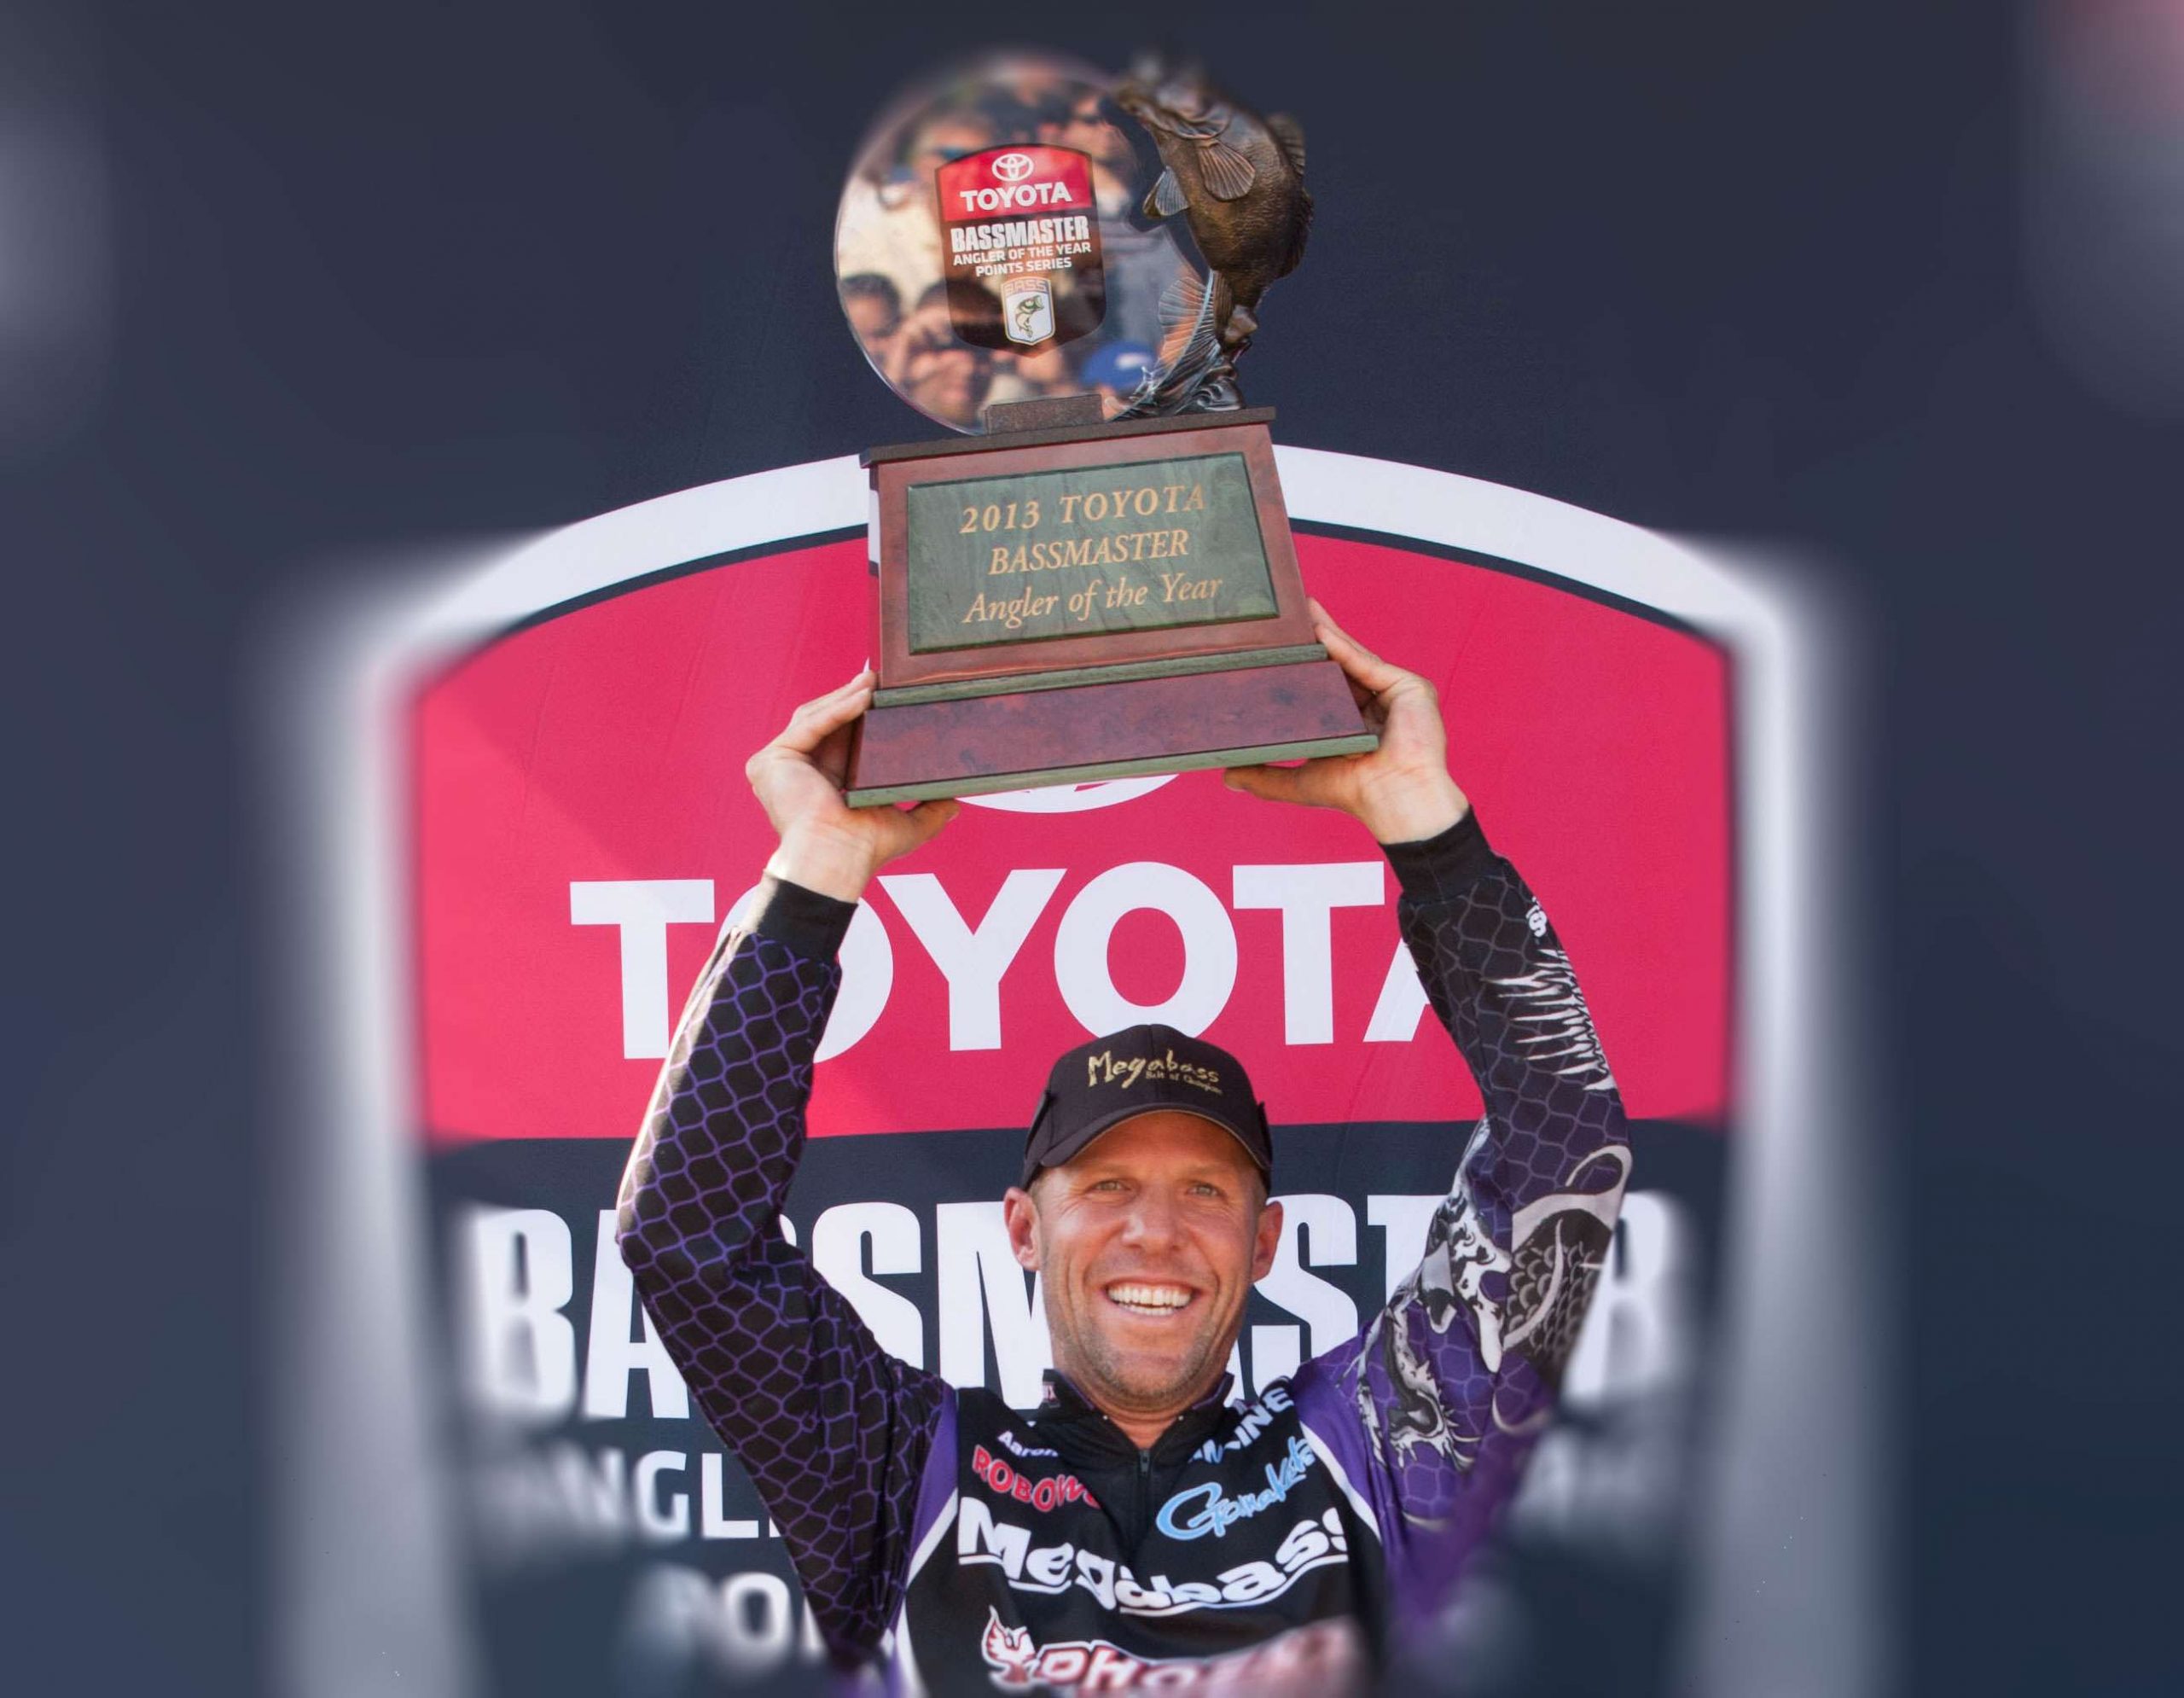 <p>Once again, the season will culminate in the Toyota Bassmaster Angler of the Year Championship tournament, to be held at a time and place to be announced later. The Top 50 pros in final standings for the regular season will battle for the Angler of the Year title, berths in the 2016 Bassmaster Classic and shares of the $1 million AOY prize fund.</p> 